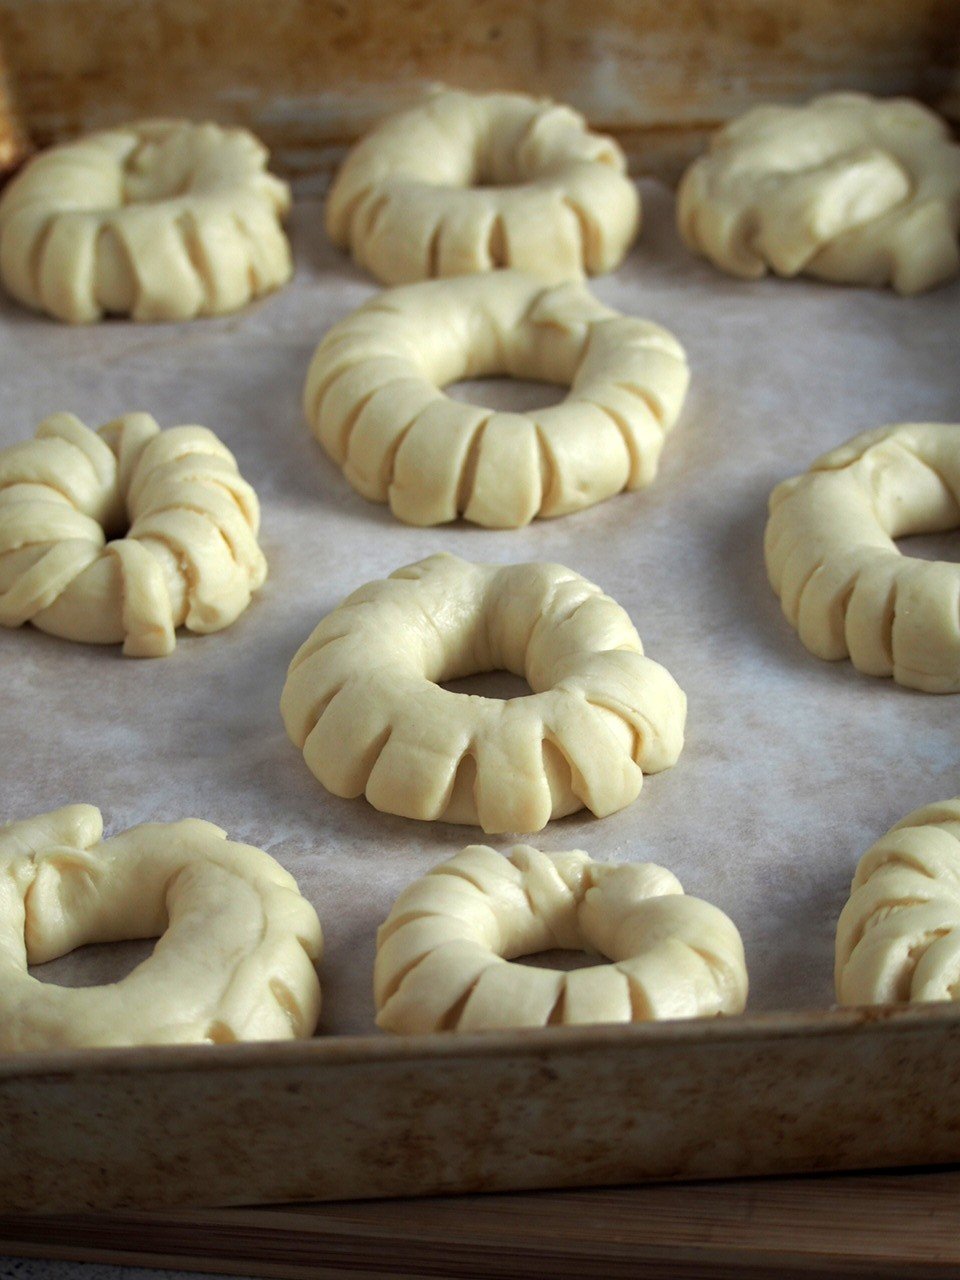 The formed white chocolate buns on the baking tray.